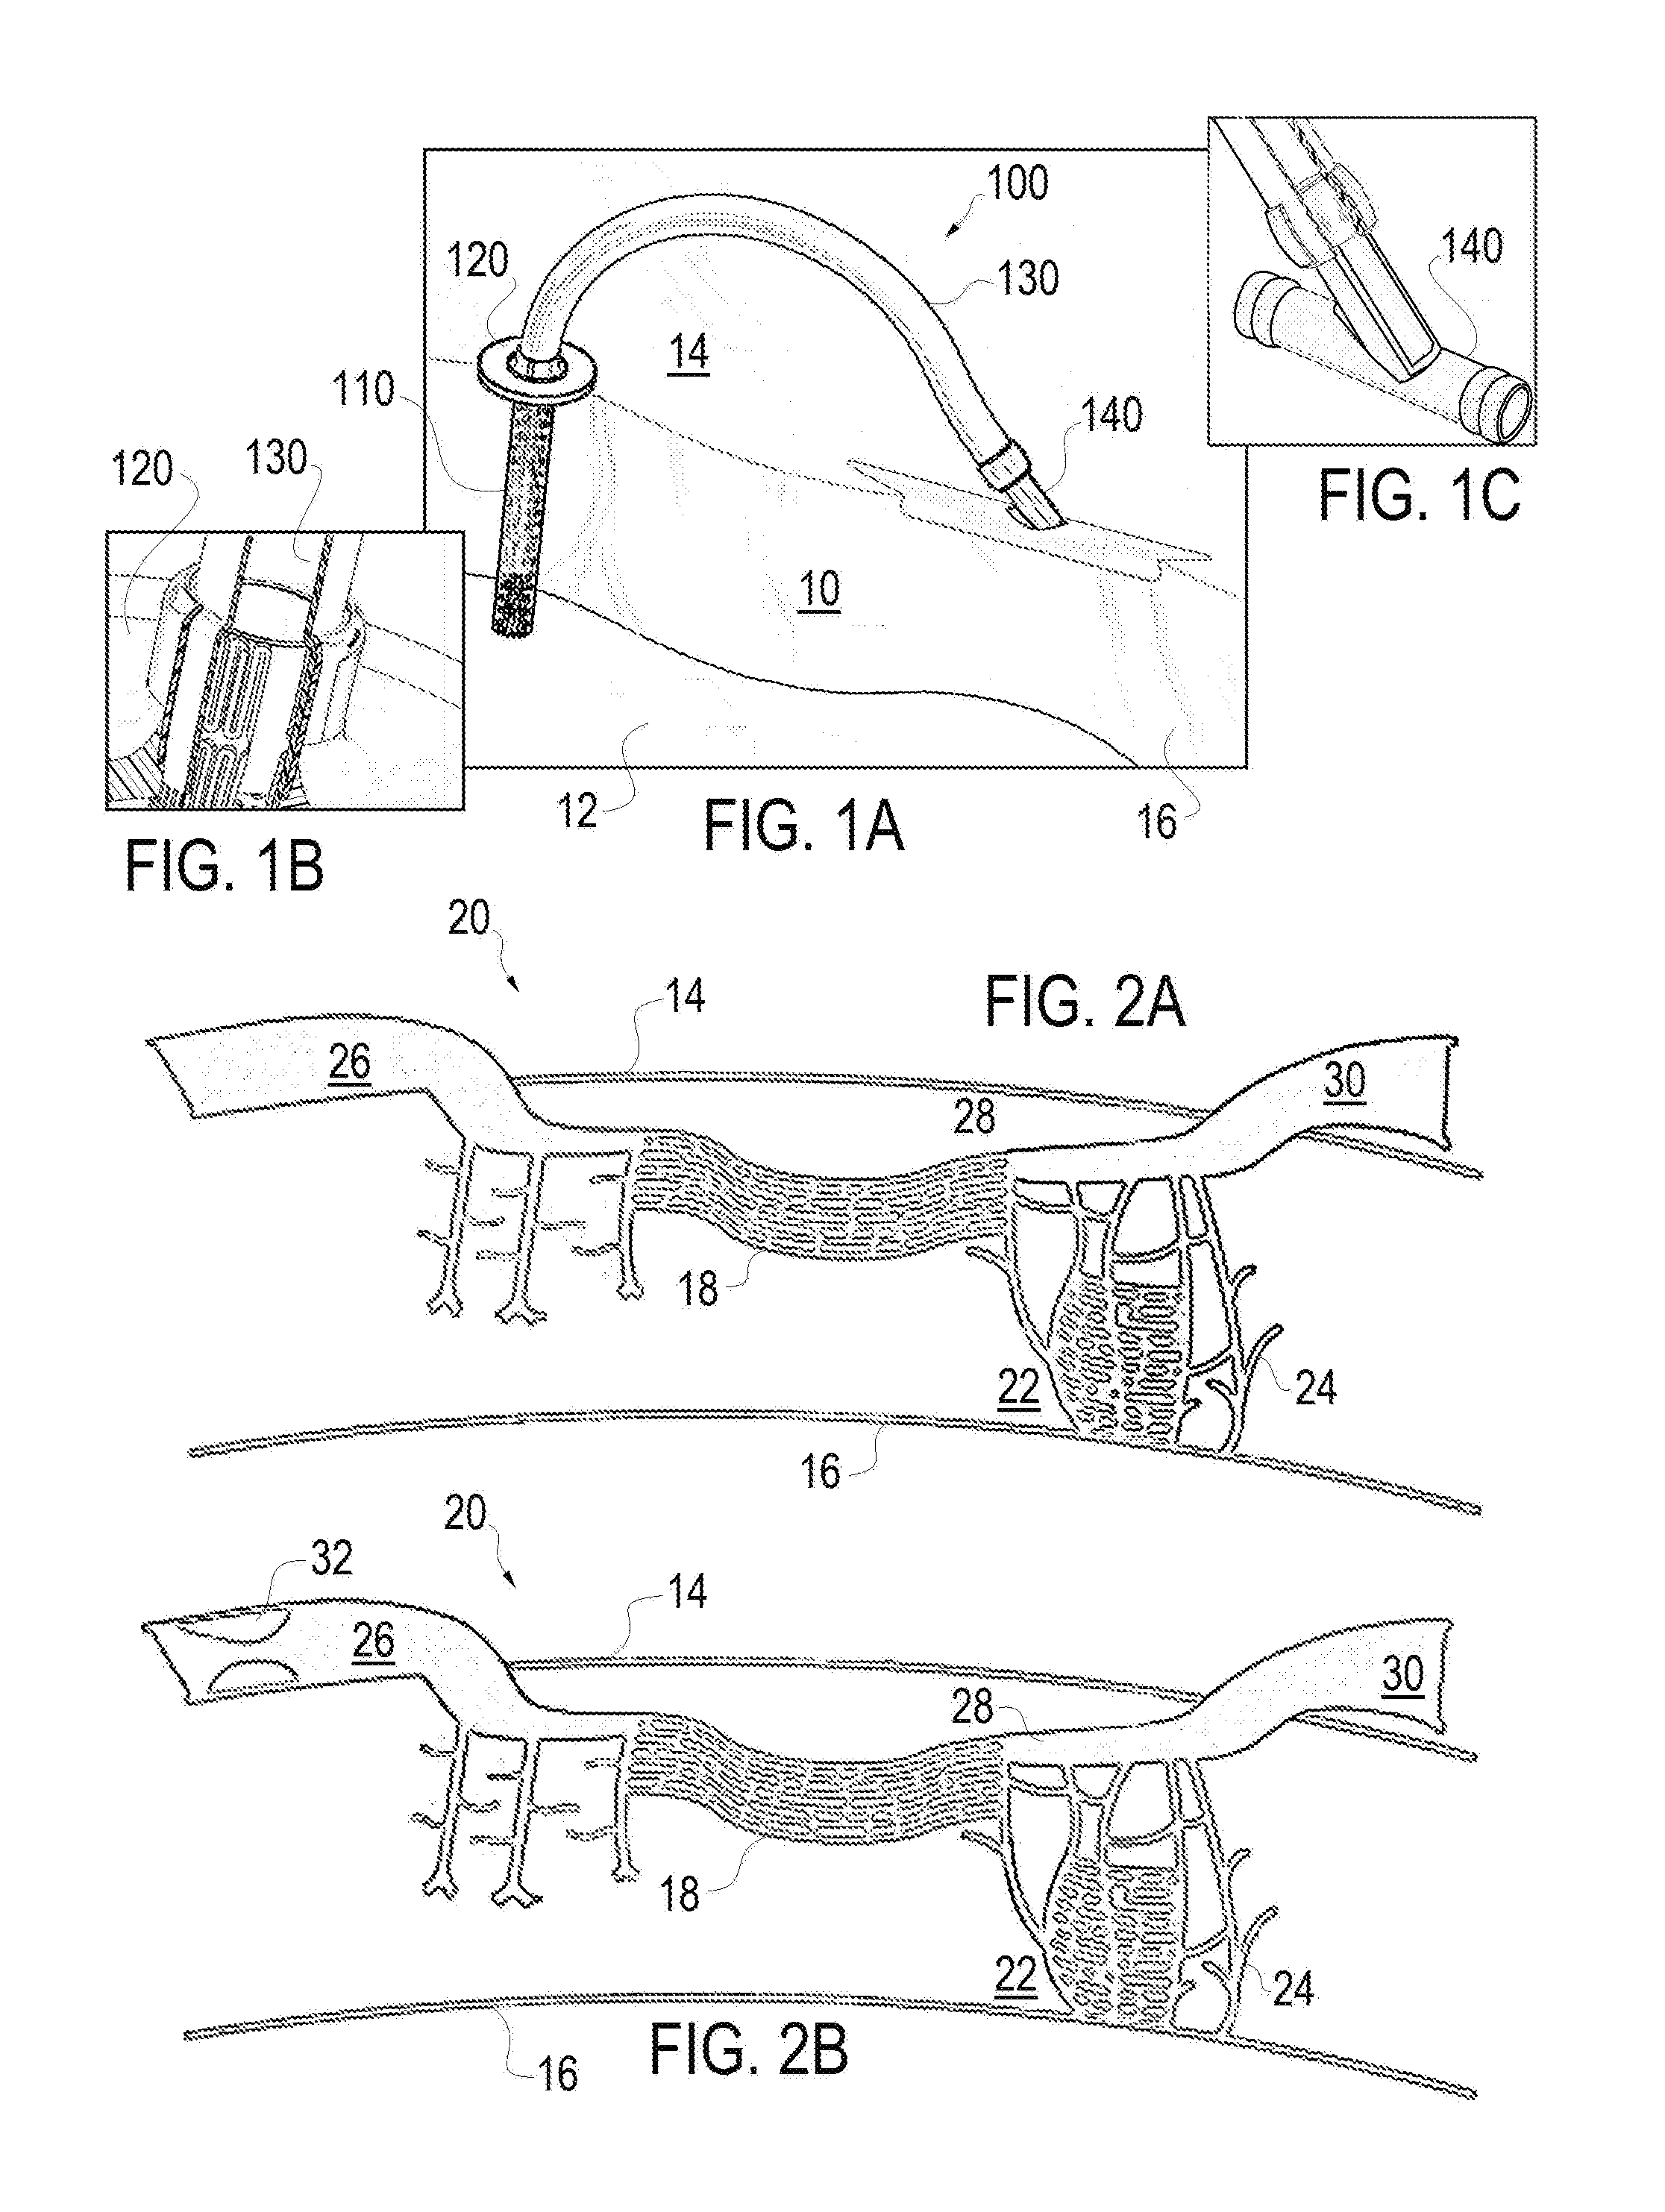 Method and apparatus for coupling left ventricle of the heart to the anterior interventricular vein to stimulate collateral development in ischemic regions